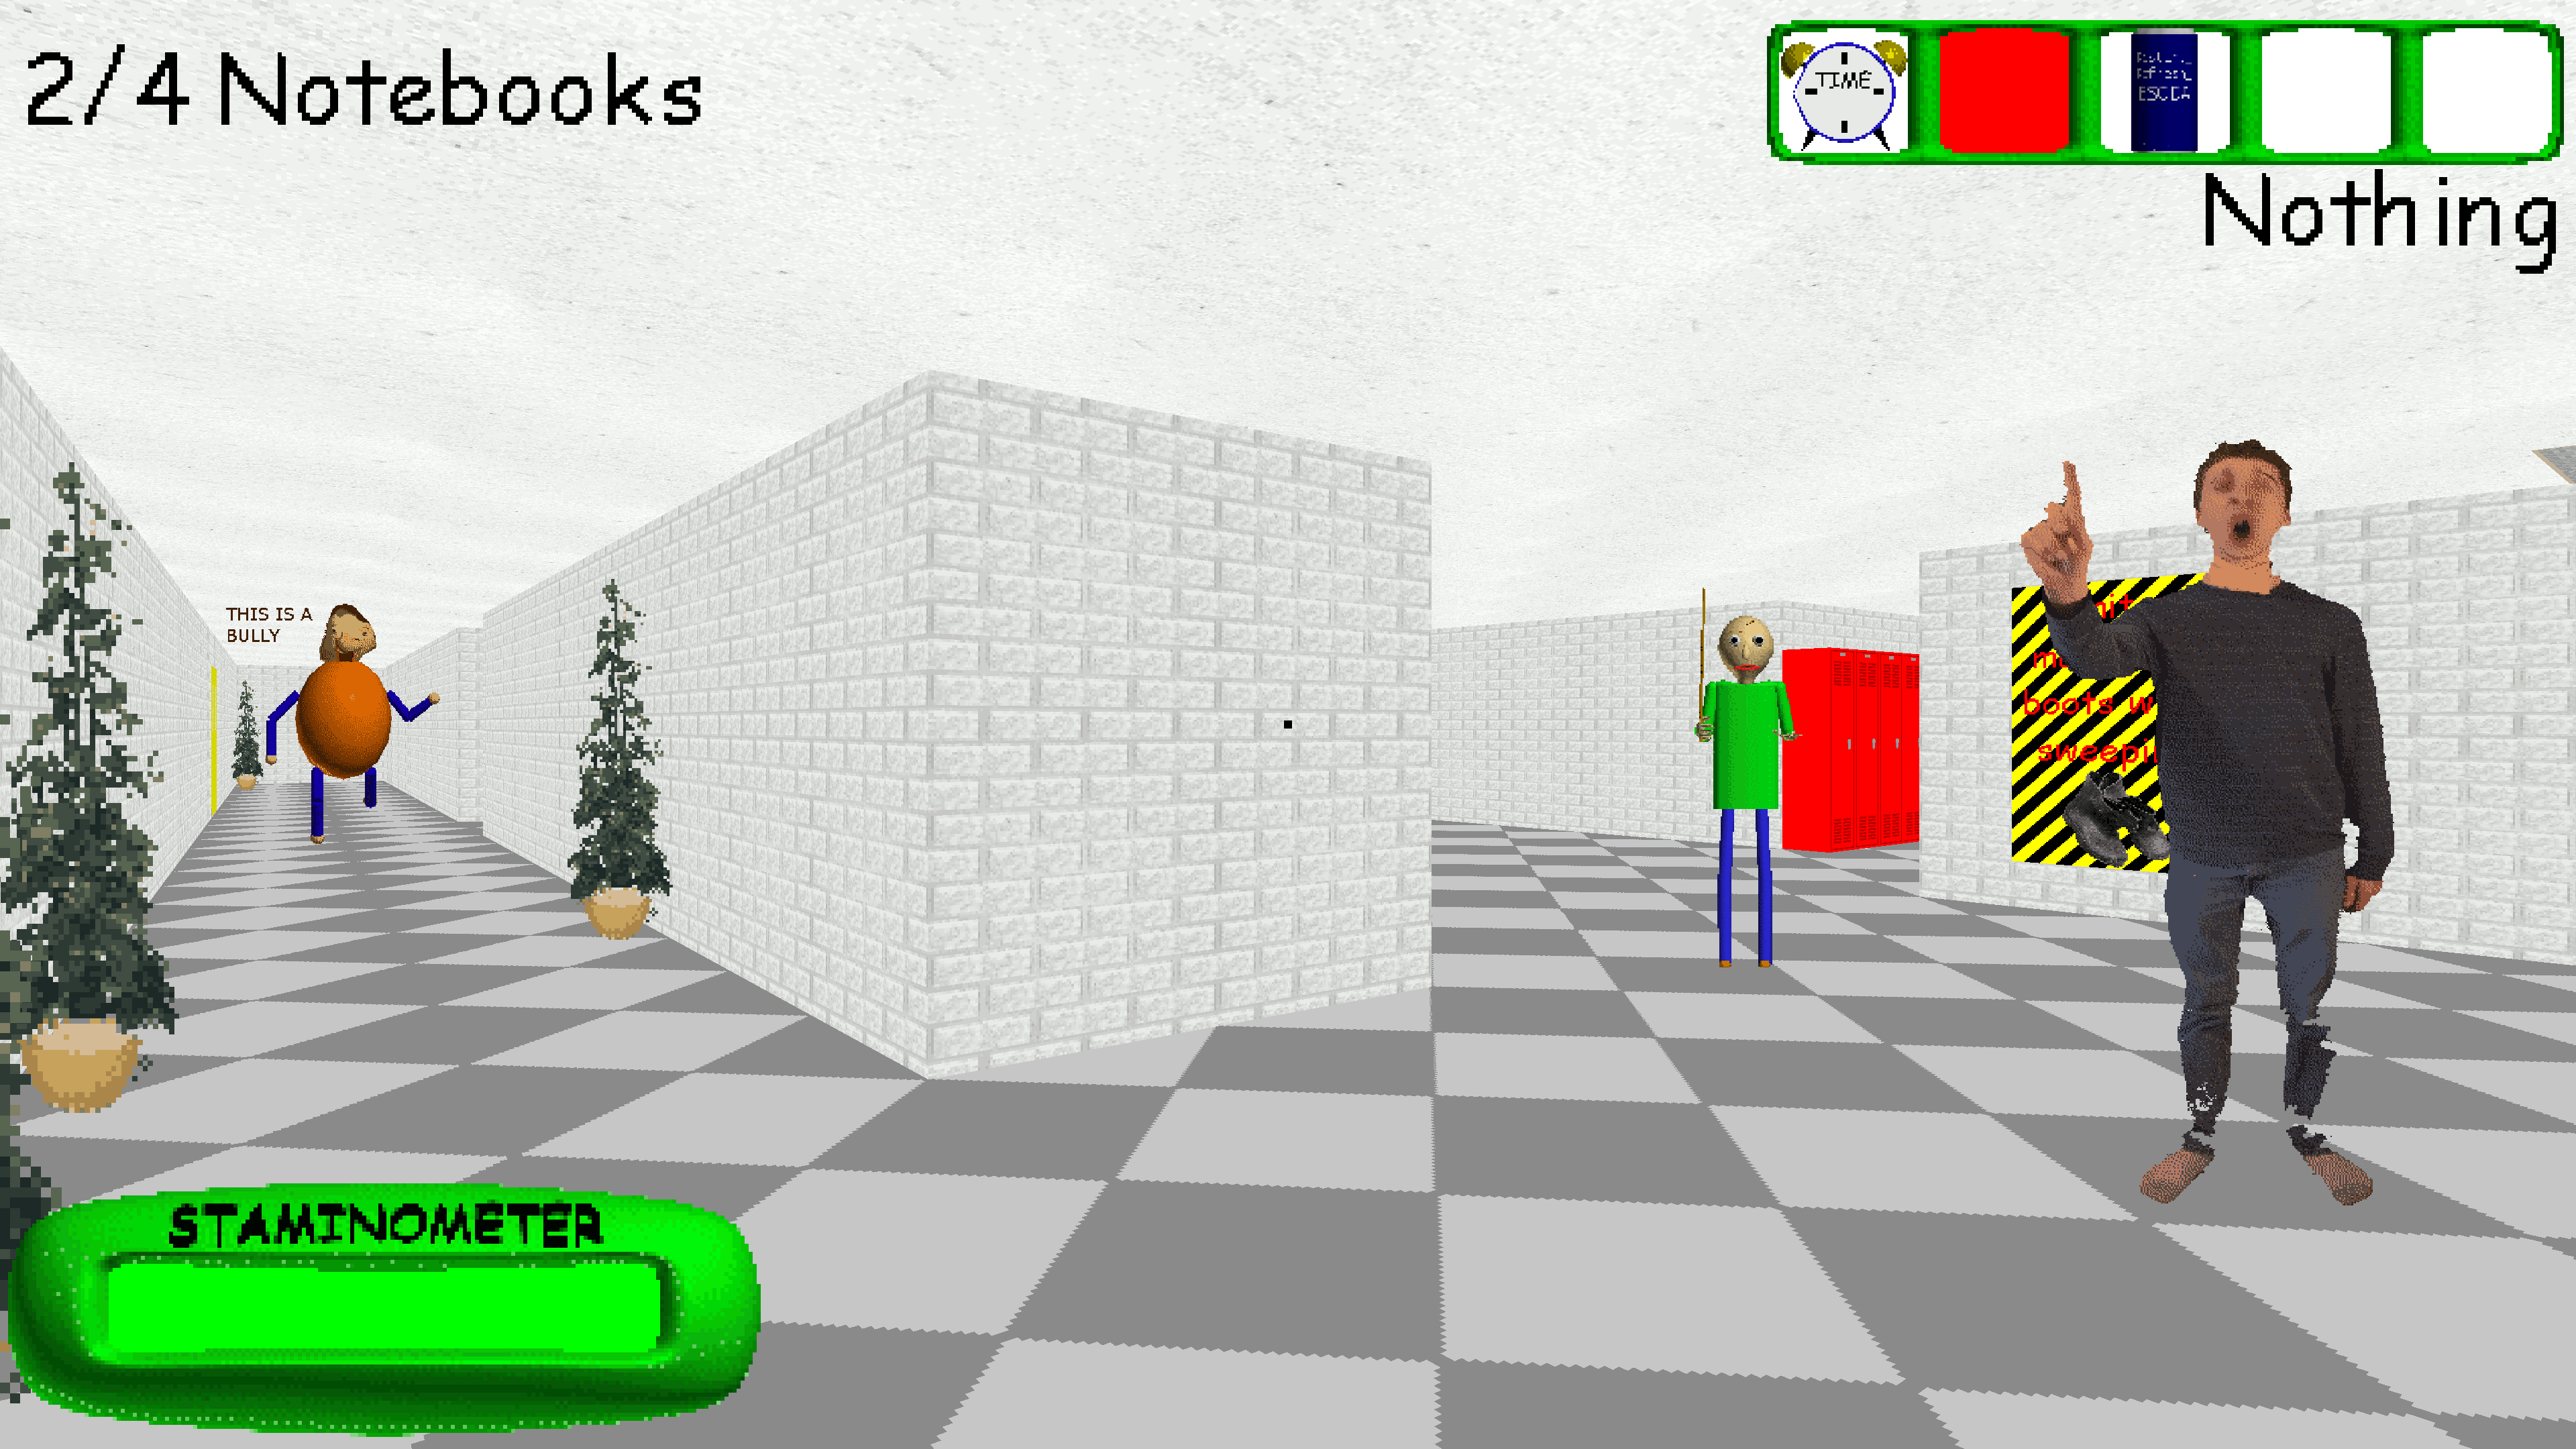 Baldi's Basics Plus Game Online - Play for Free Now